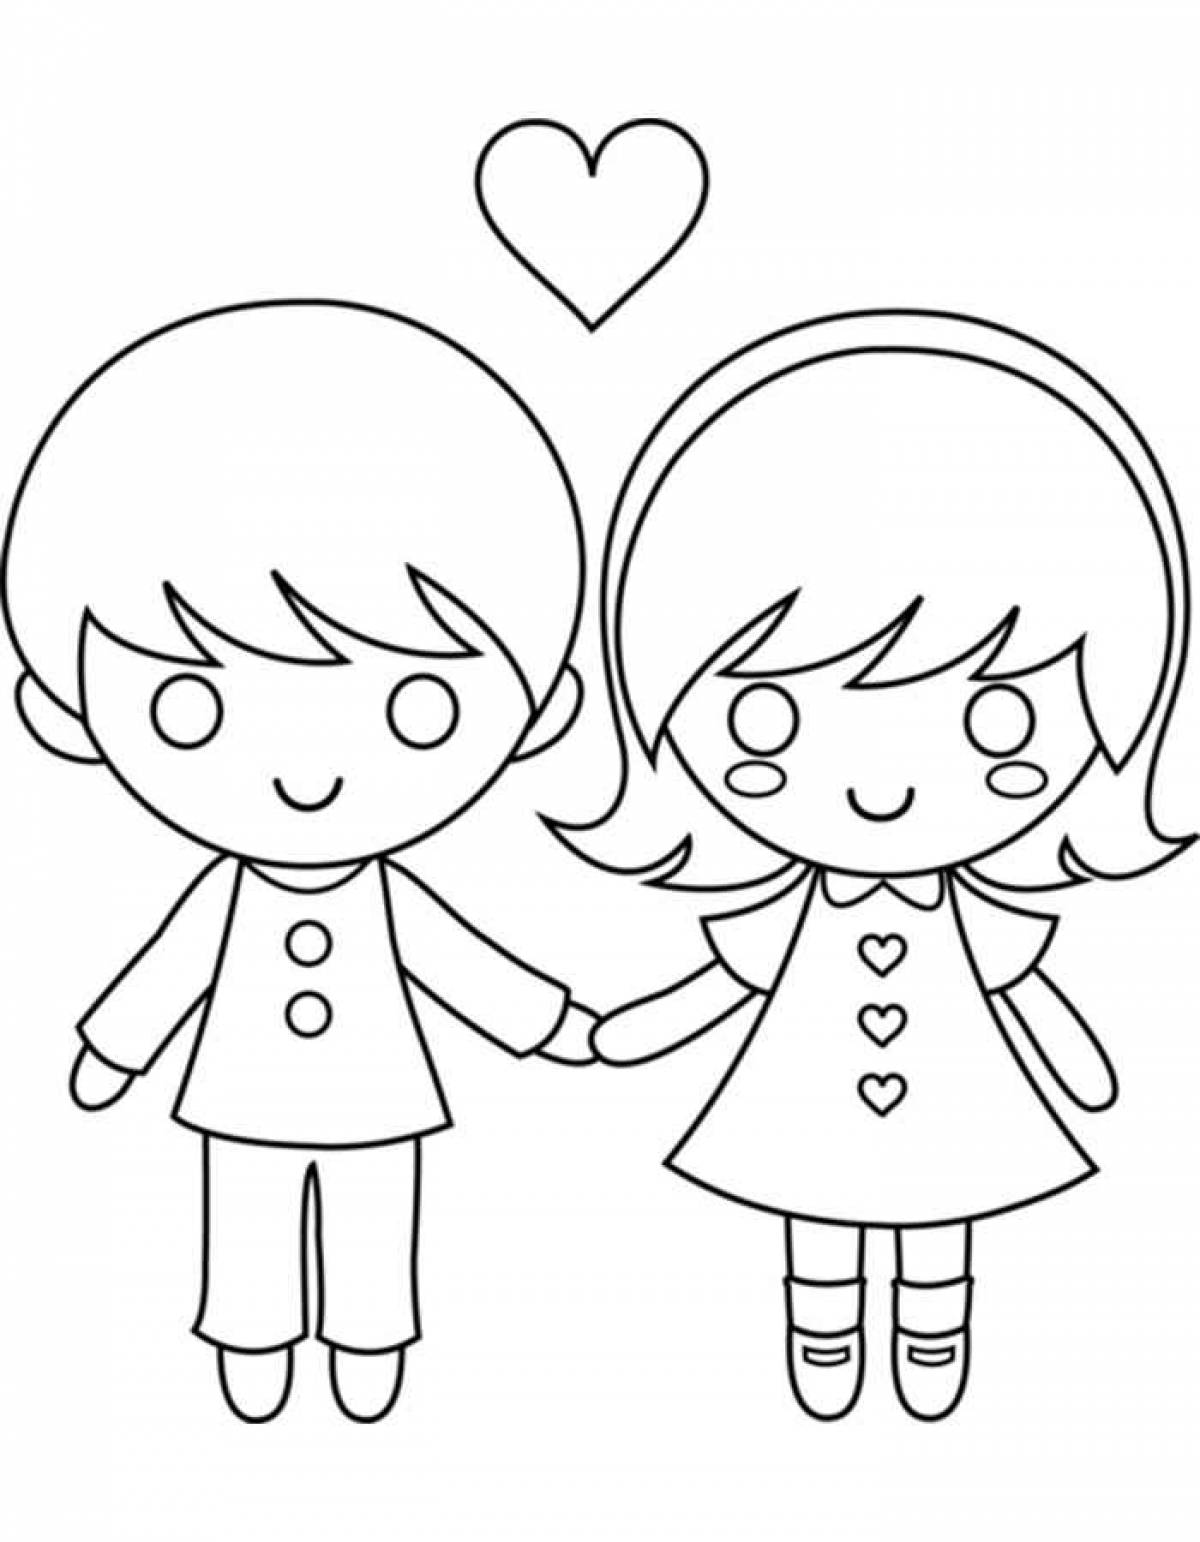 Boy and girl coloring pages